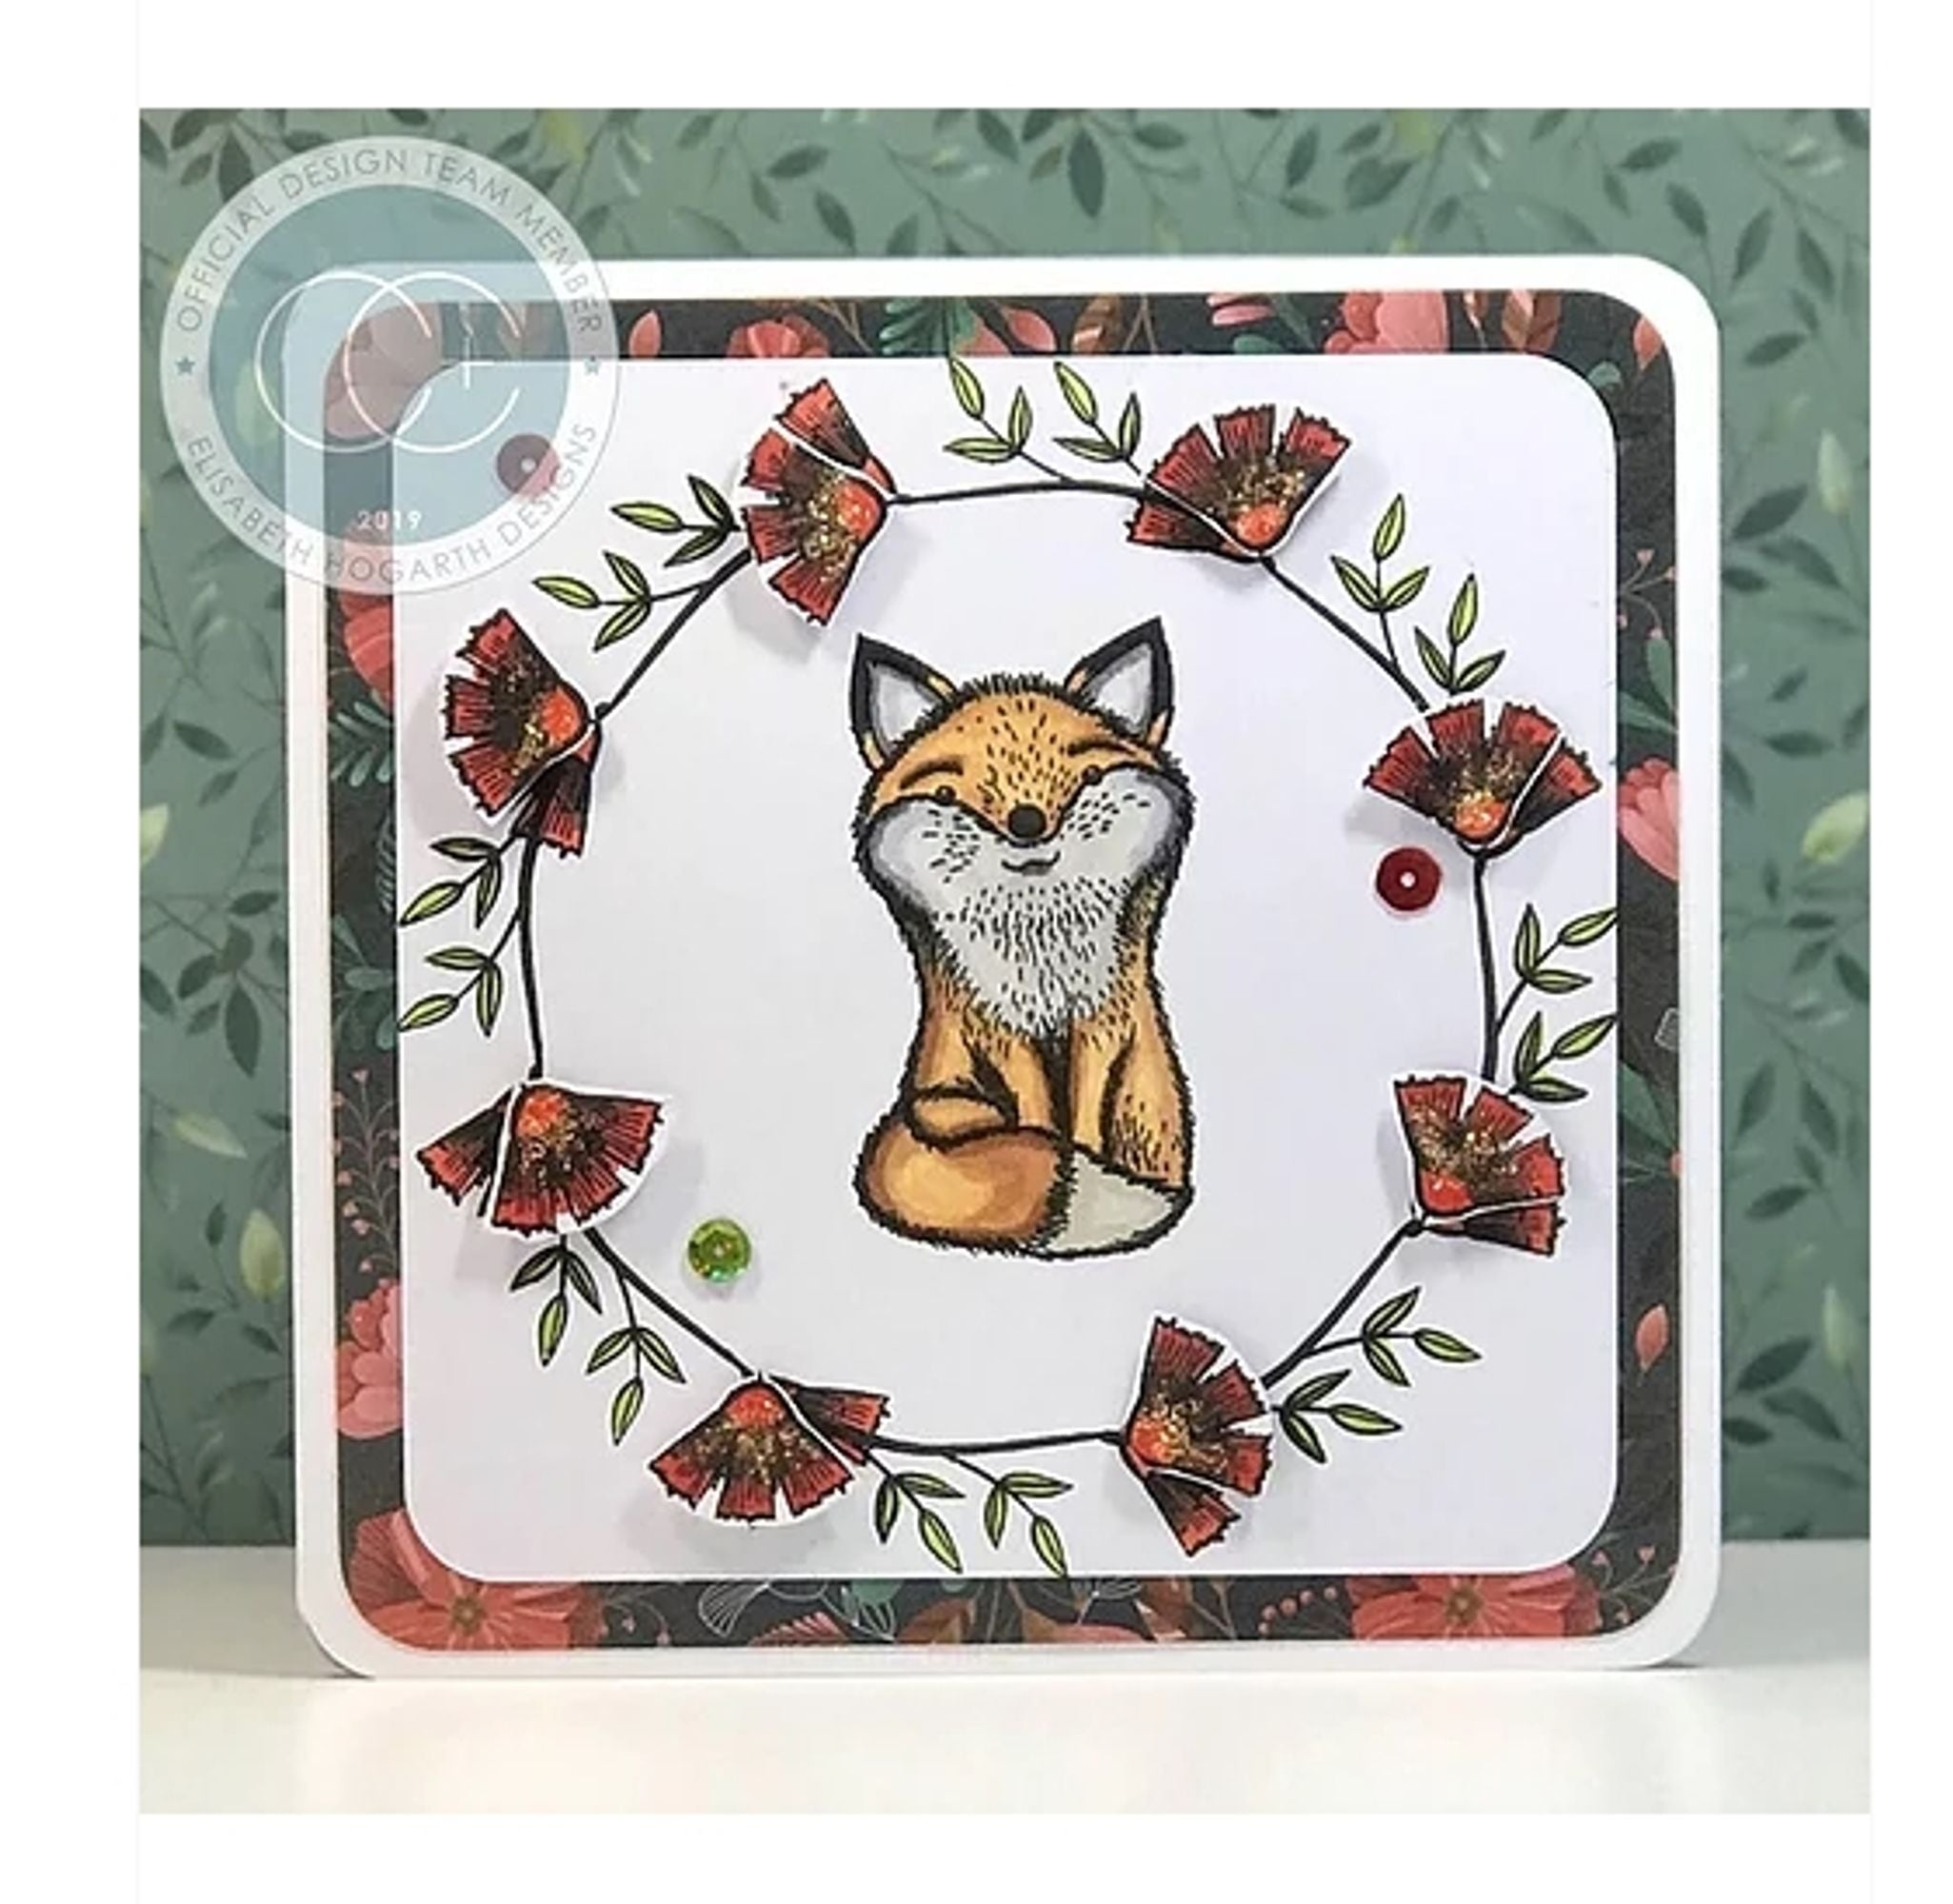 Over the Hedge - Stamp Set - Henry the Fox